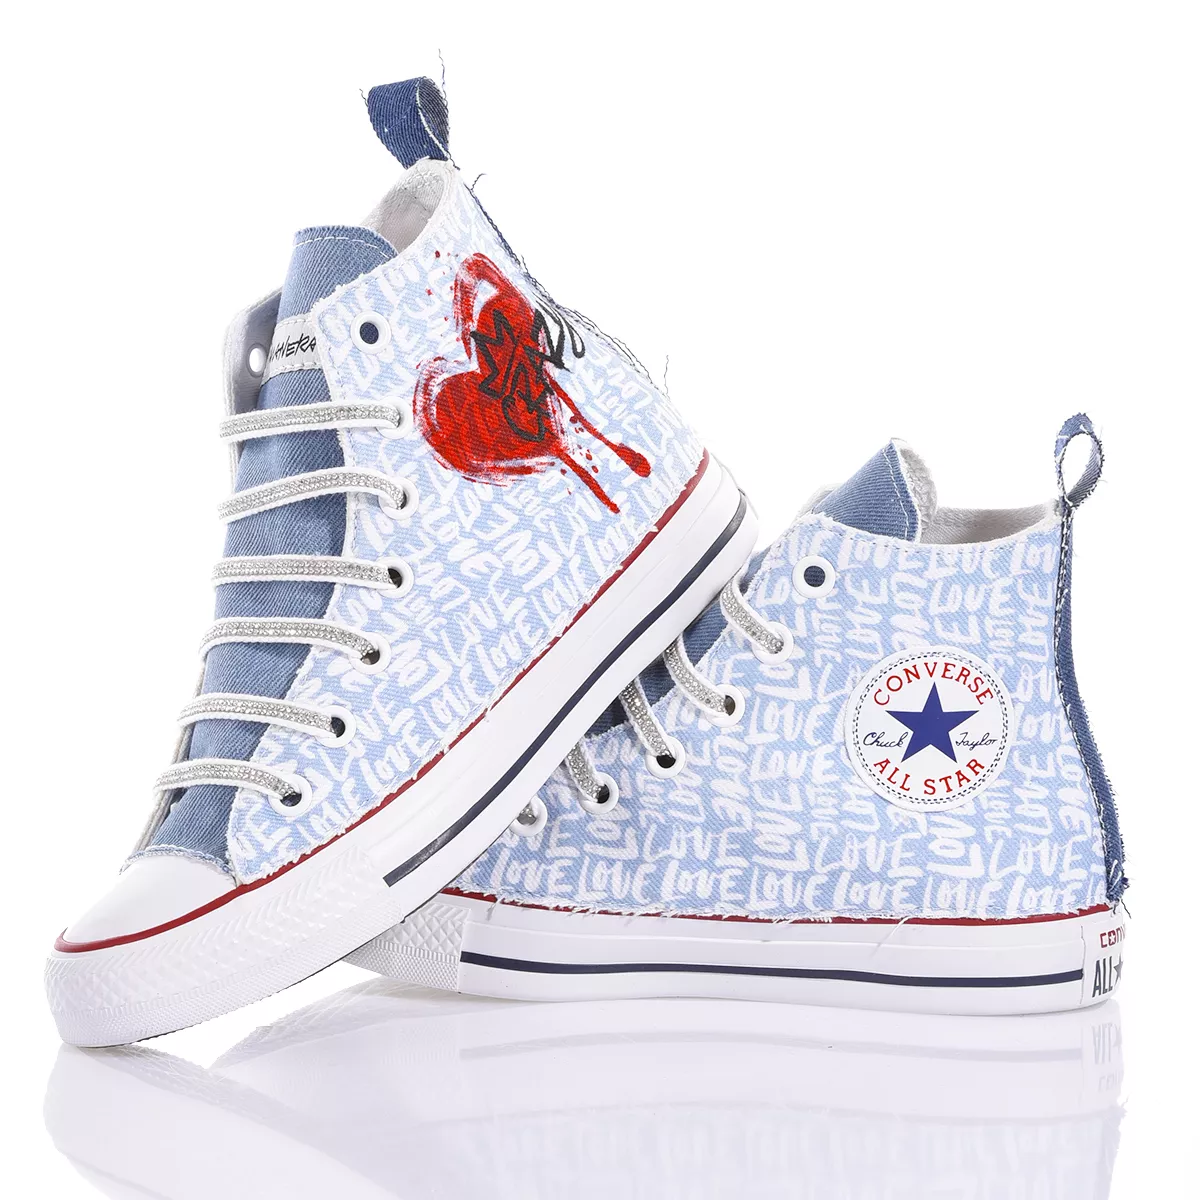 Converse Crazy Love Chuck Taylor High Top Painted, Special